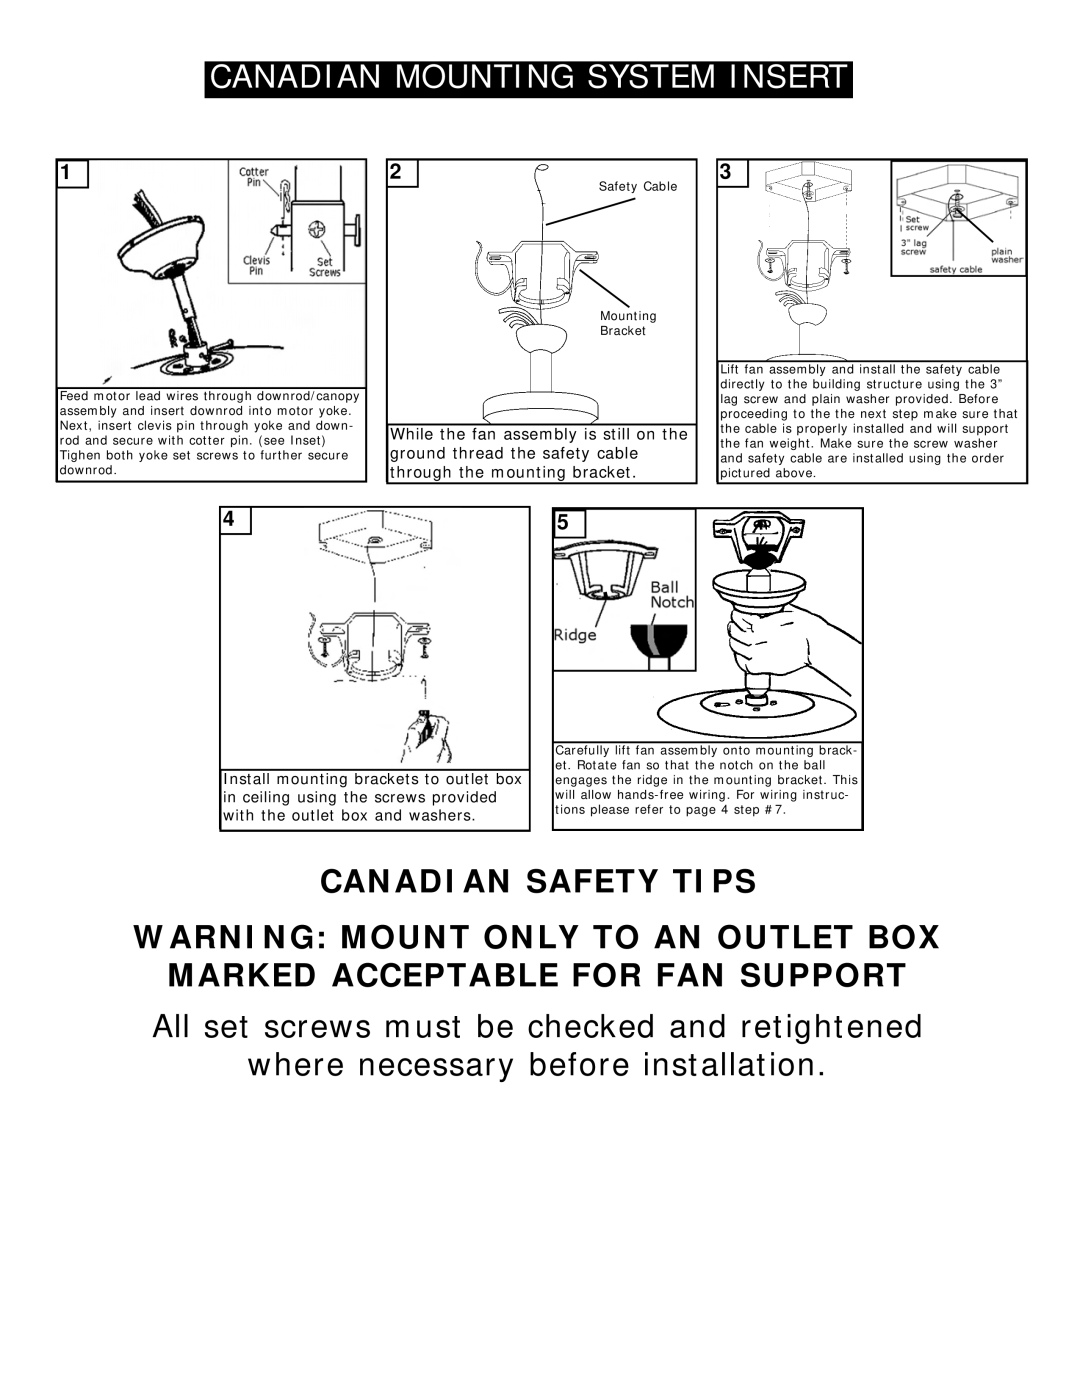 Monte Carlo Fan Company 5DS52 Canadian Safety Tips, While the fan assembly is still on the, ground thread the safety cable 